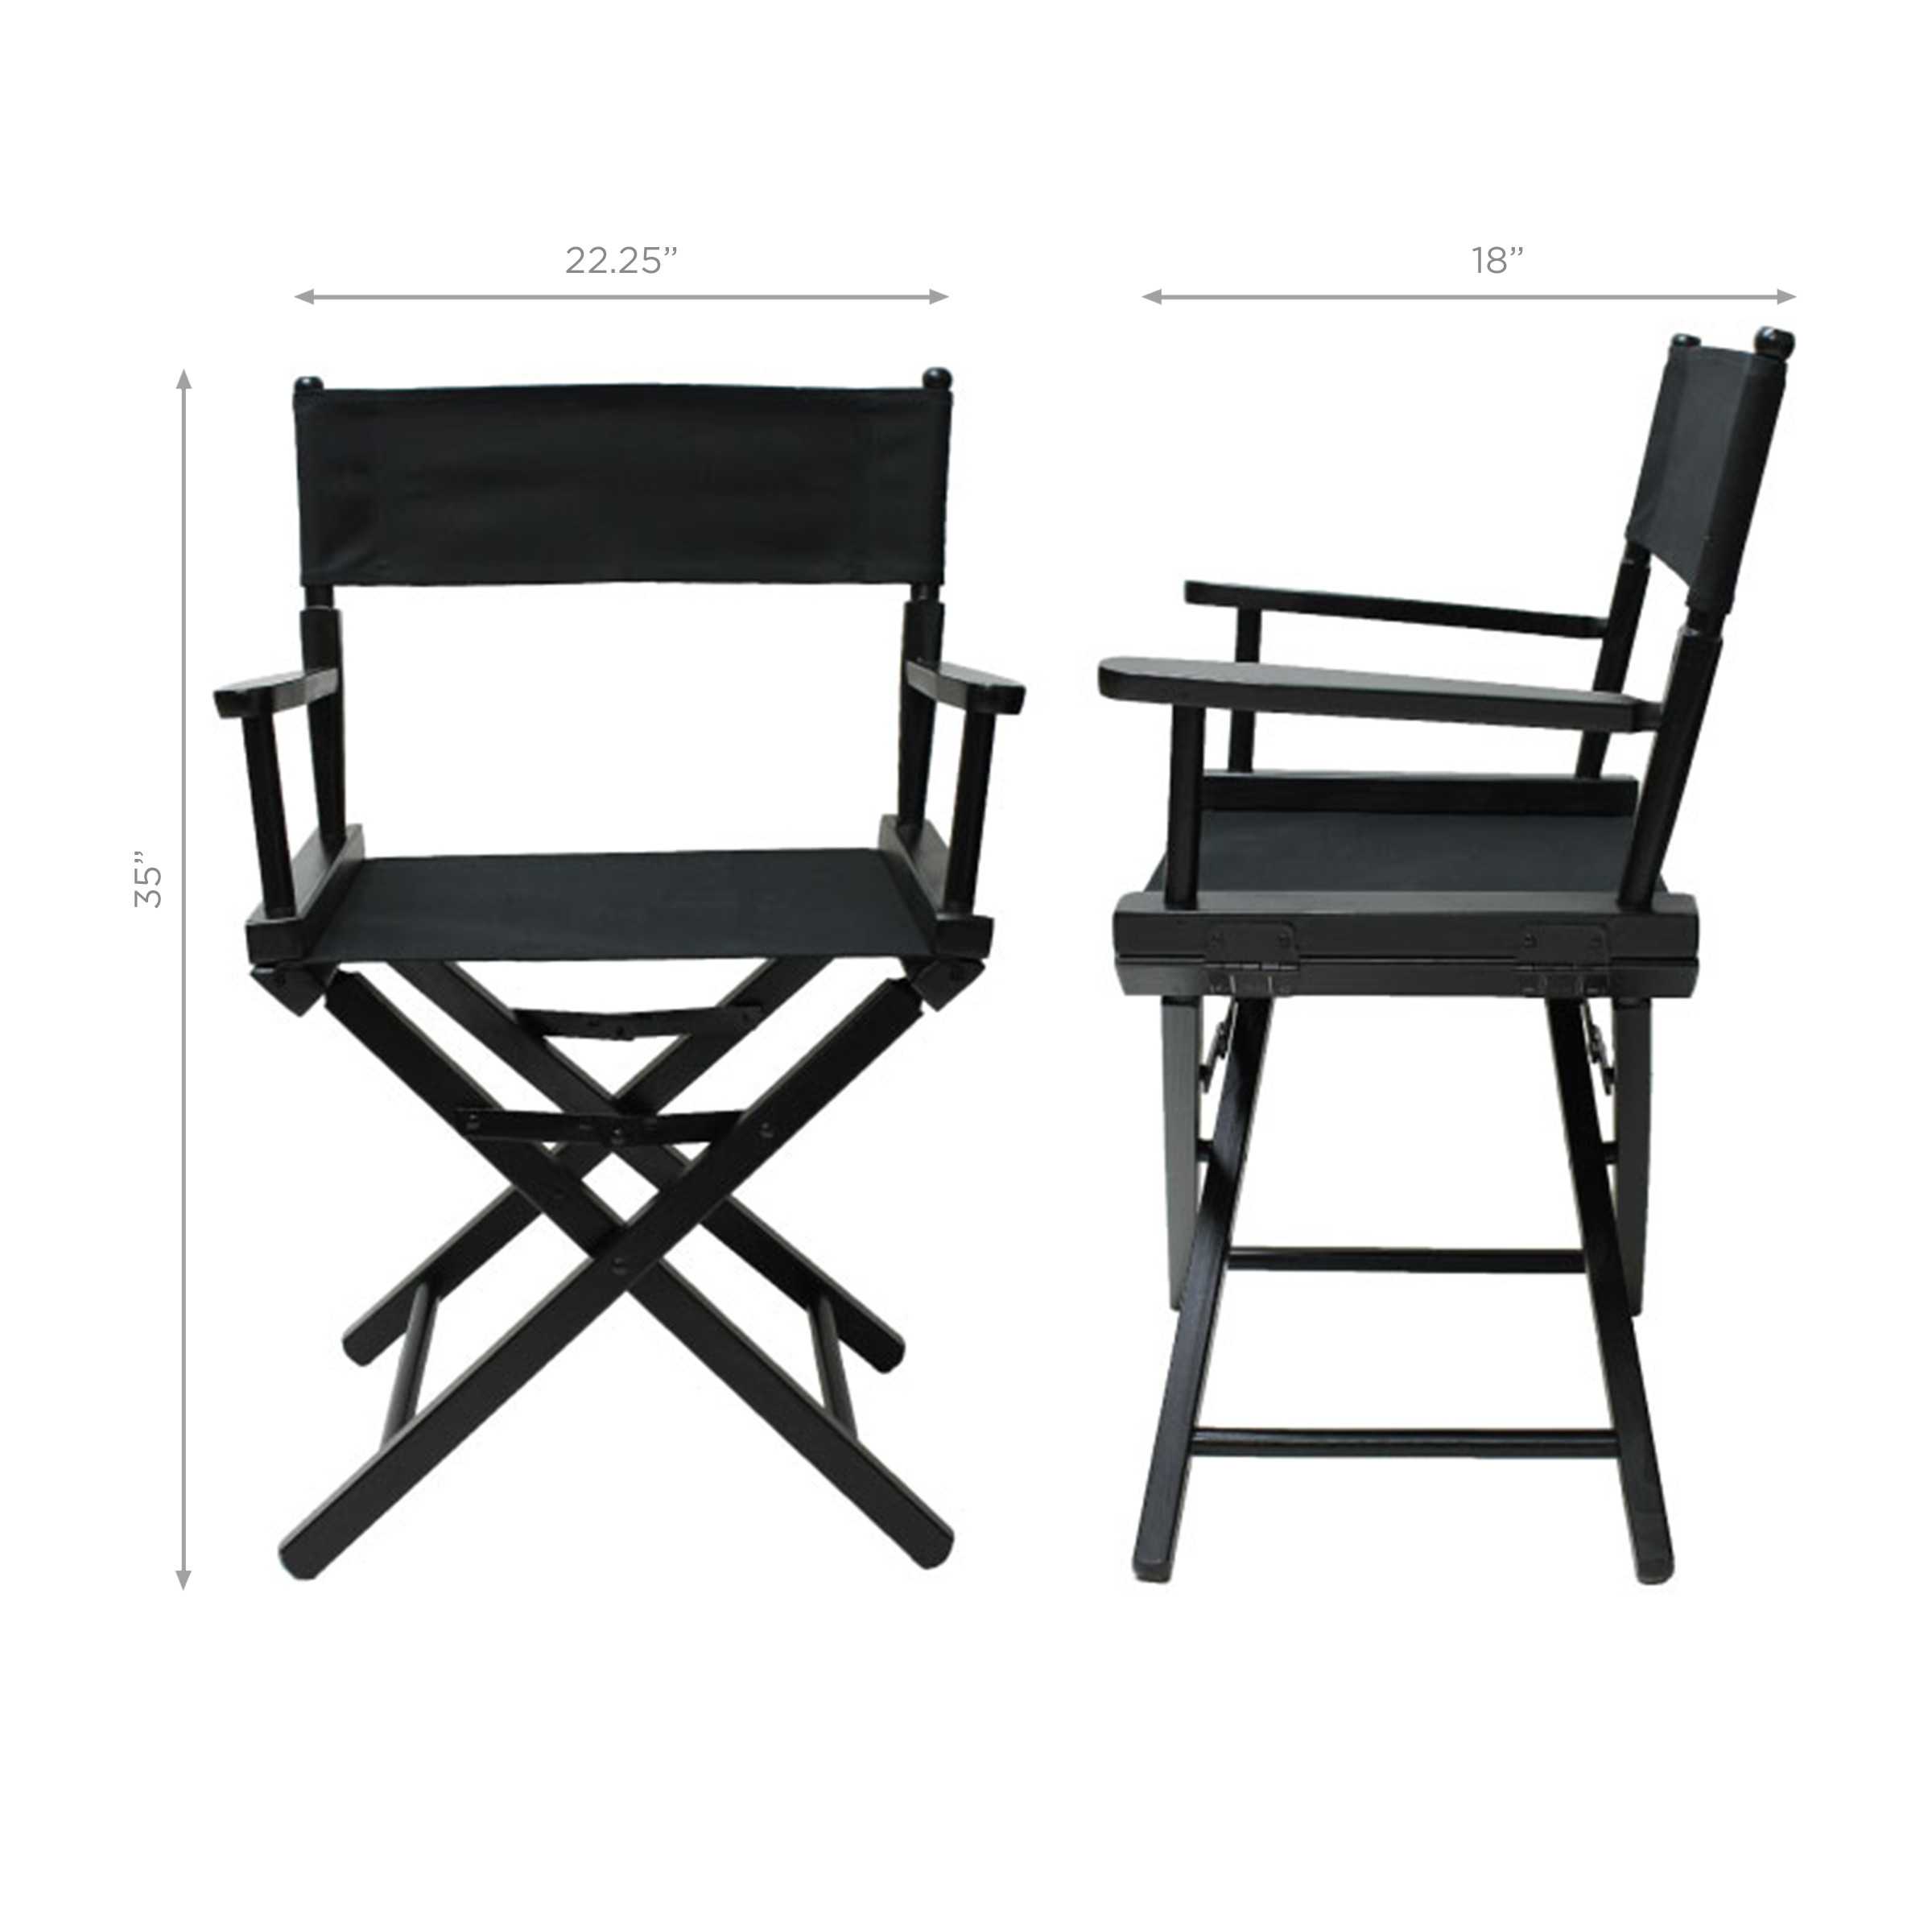 PENN STATE DIRECTORS CHAIR-TABLE HEIGHT